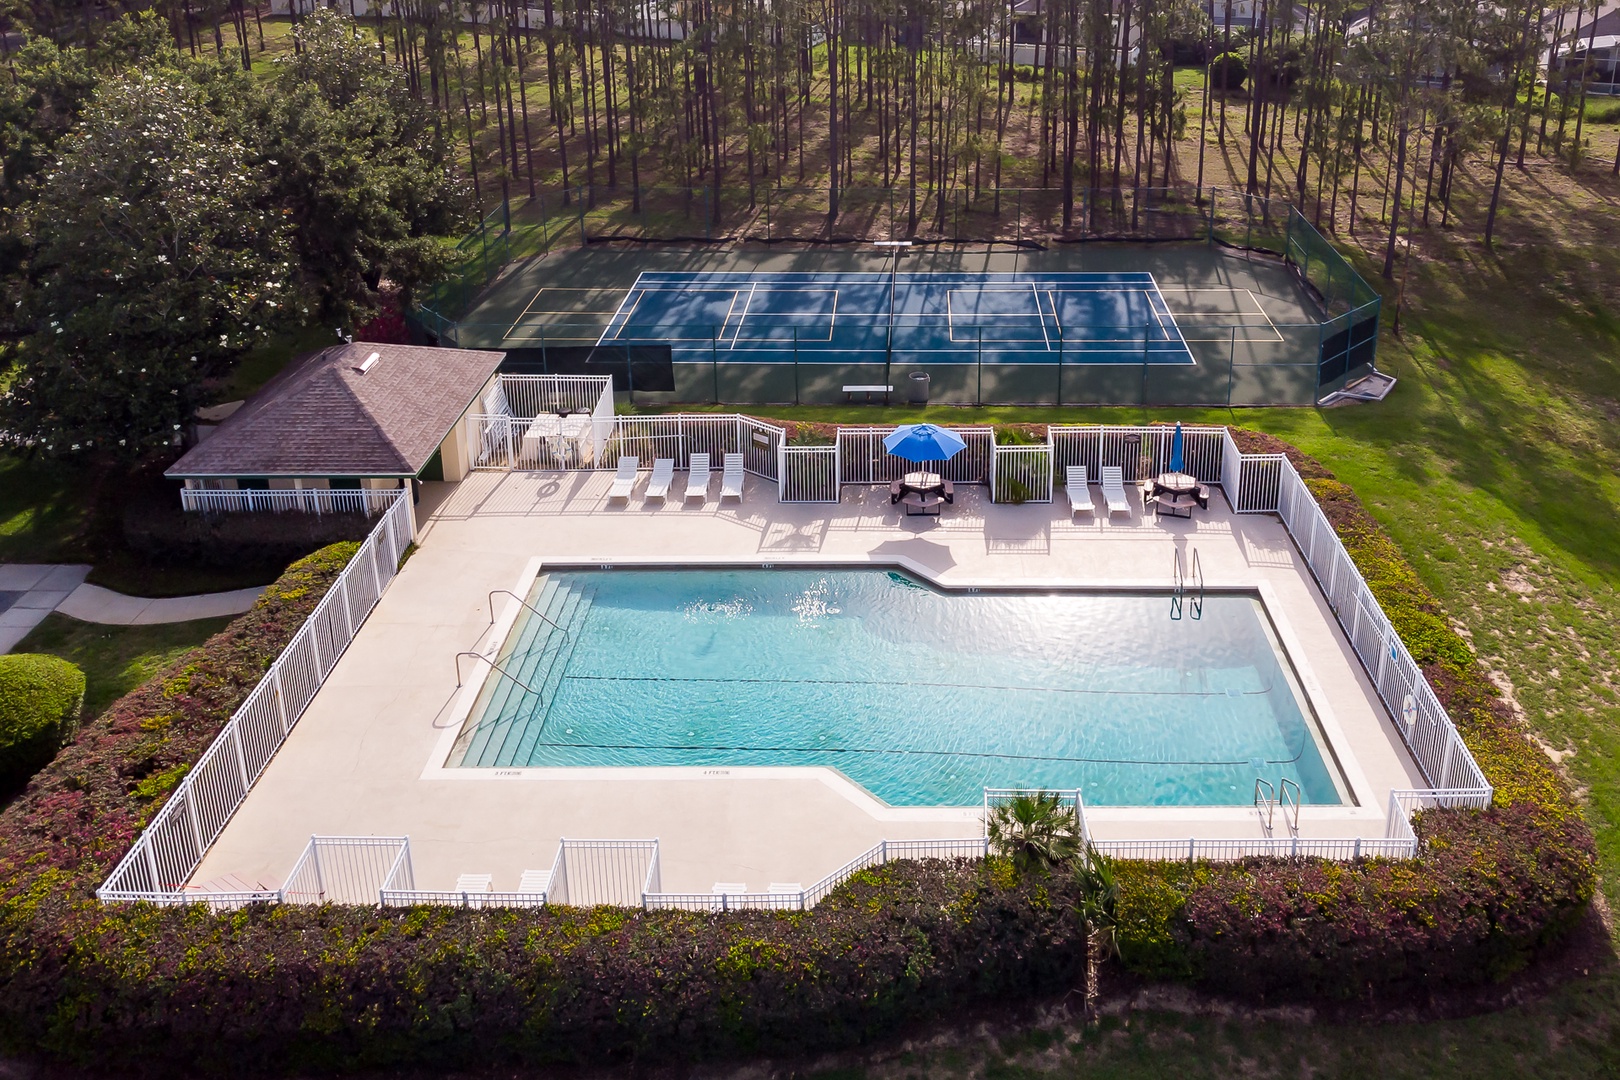 3 Highlands Reserve Pool and Tennis